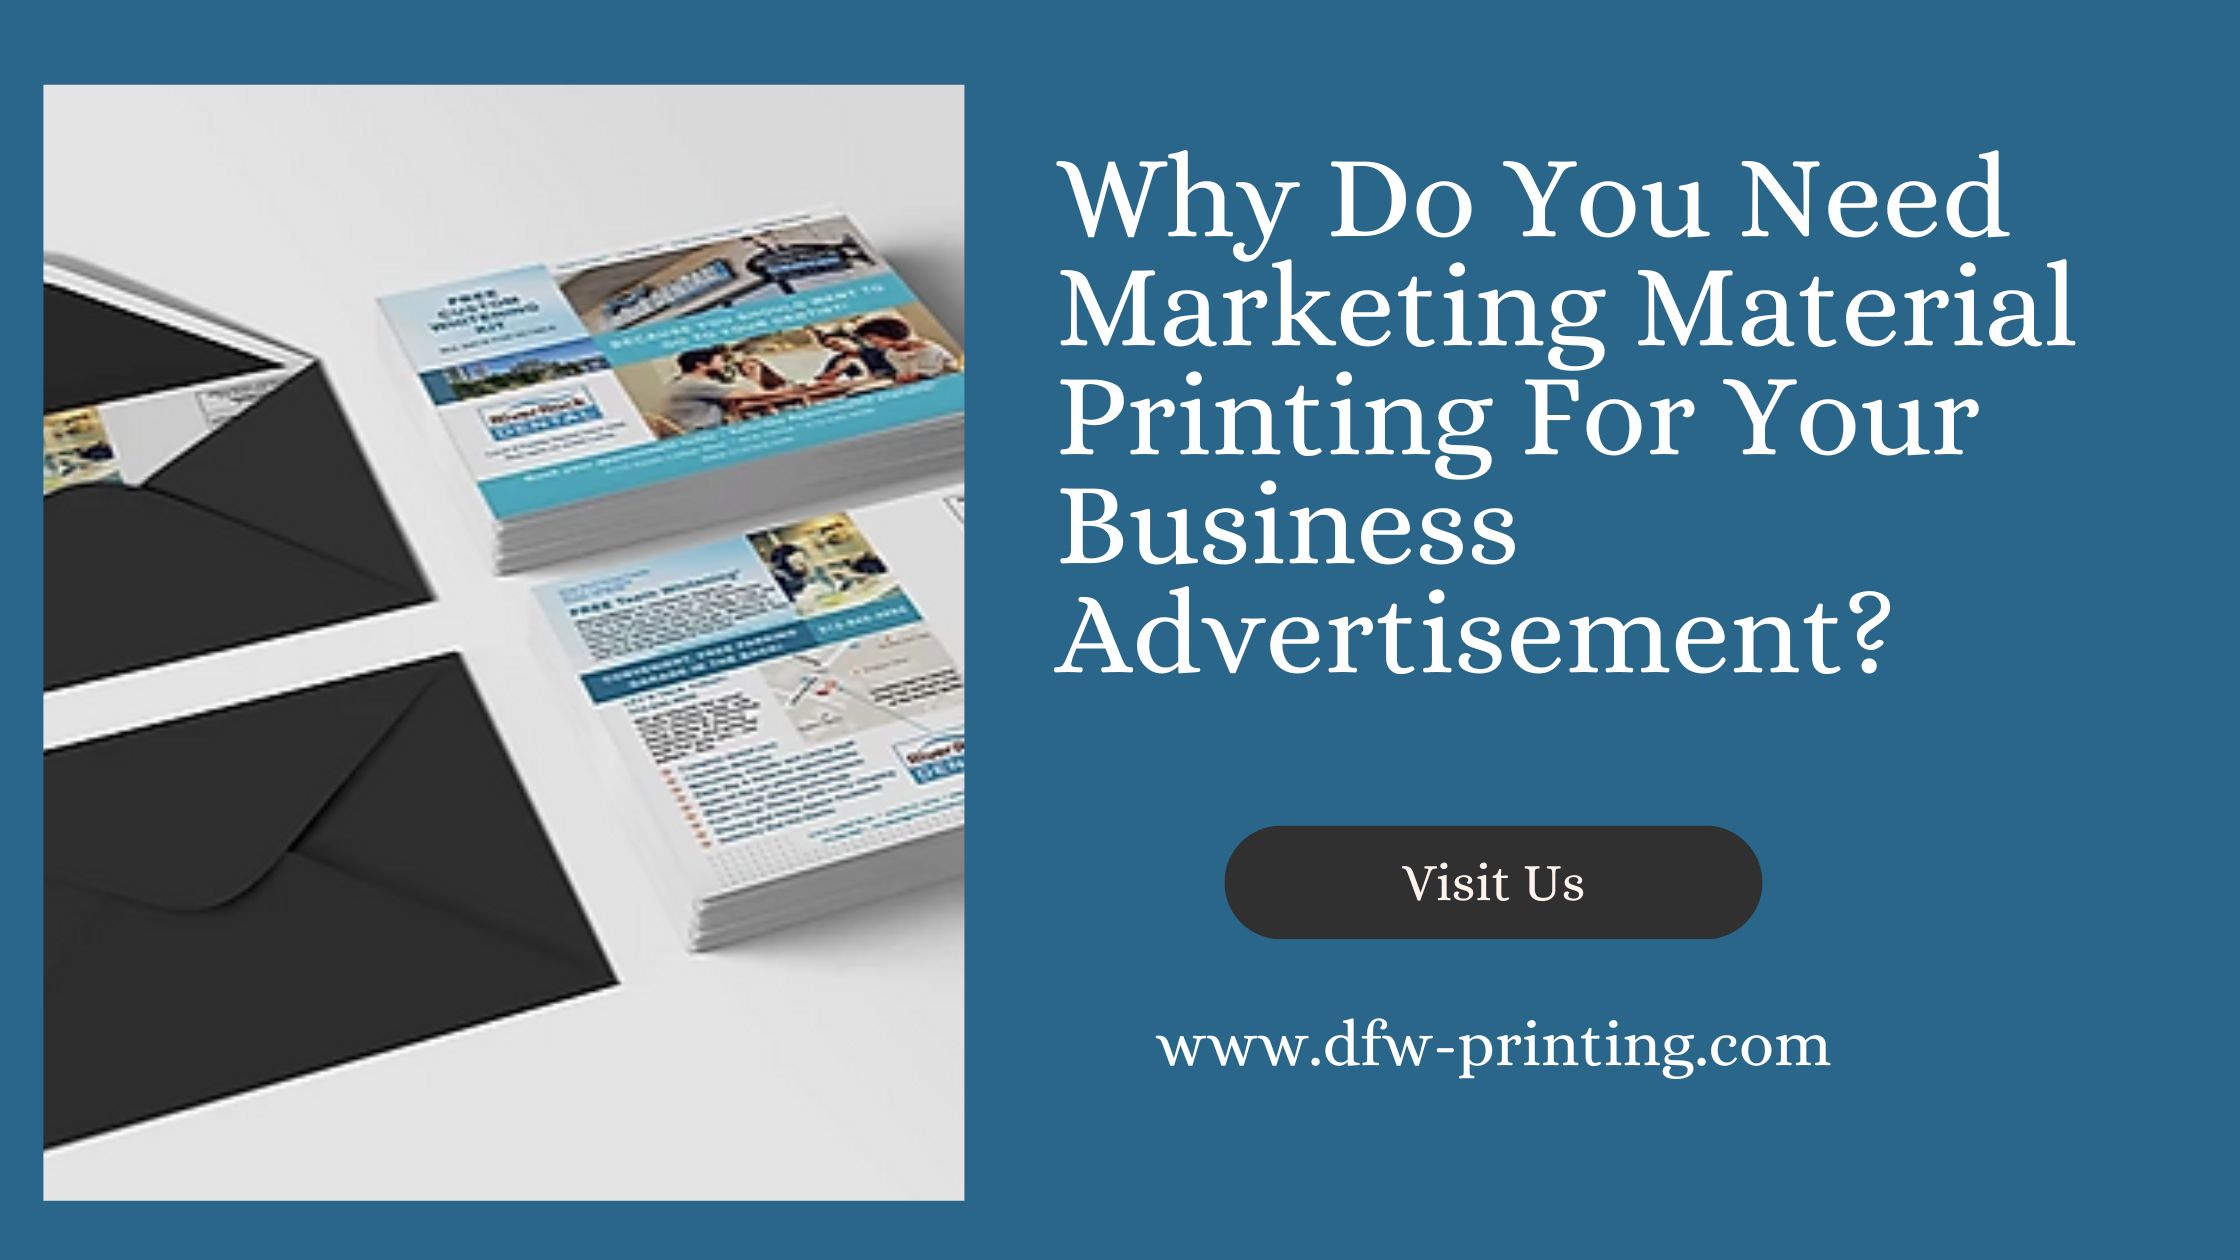 Why Do You Need Marketing Material Printing for Your Business Advertisement?